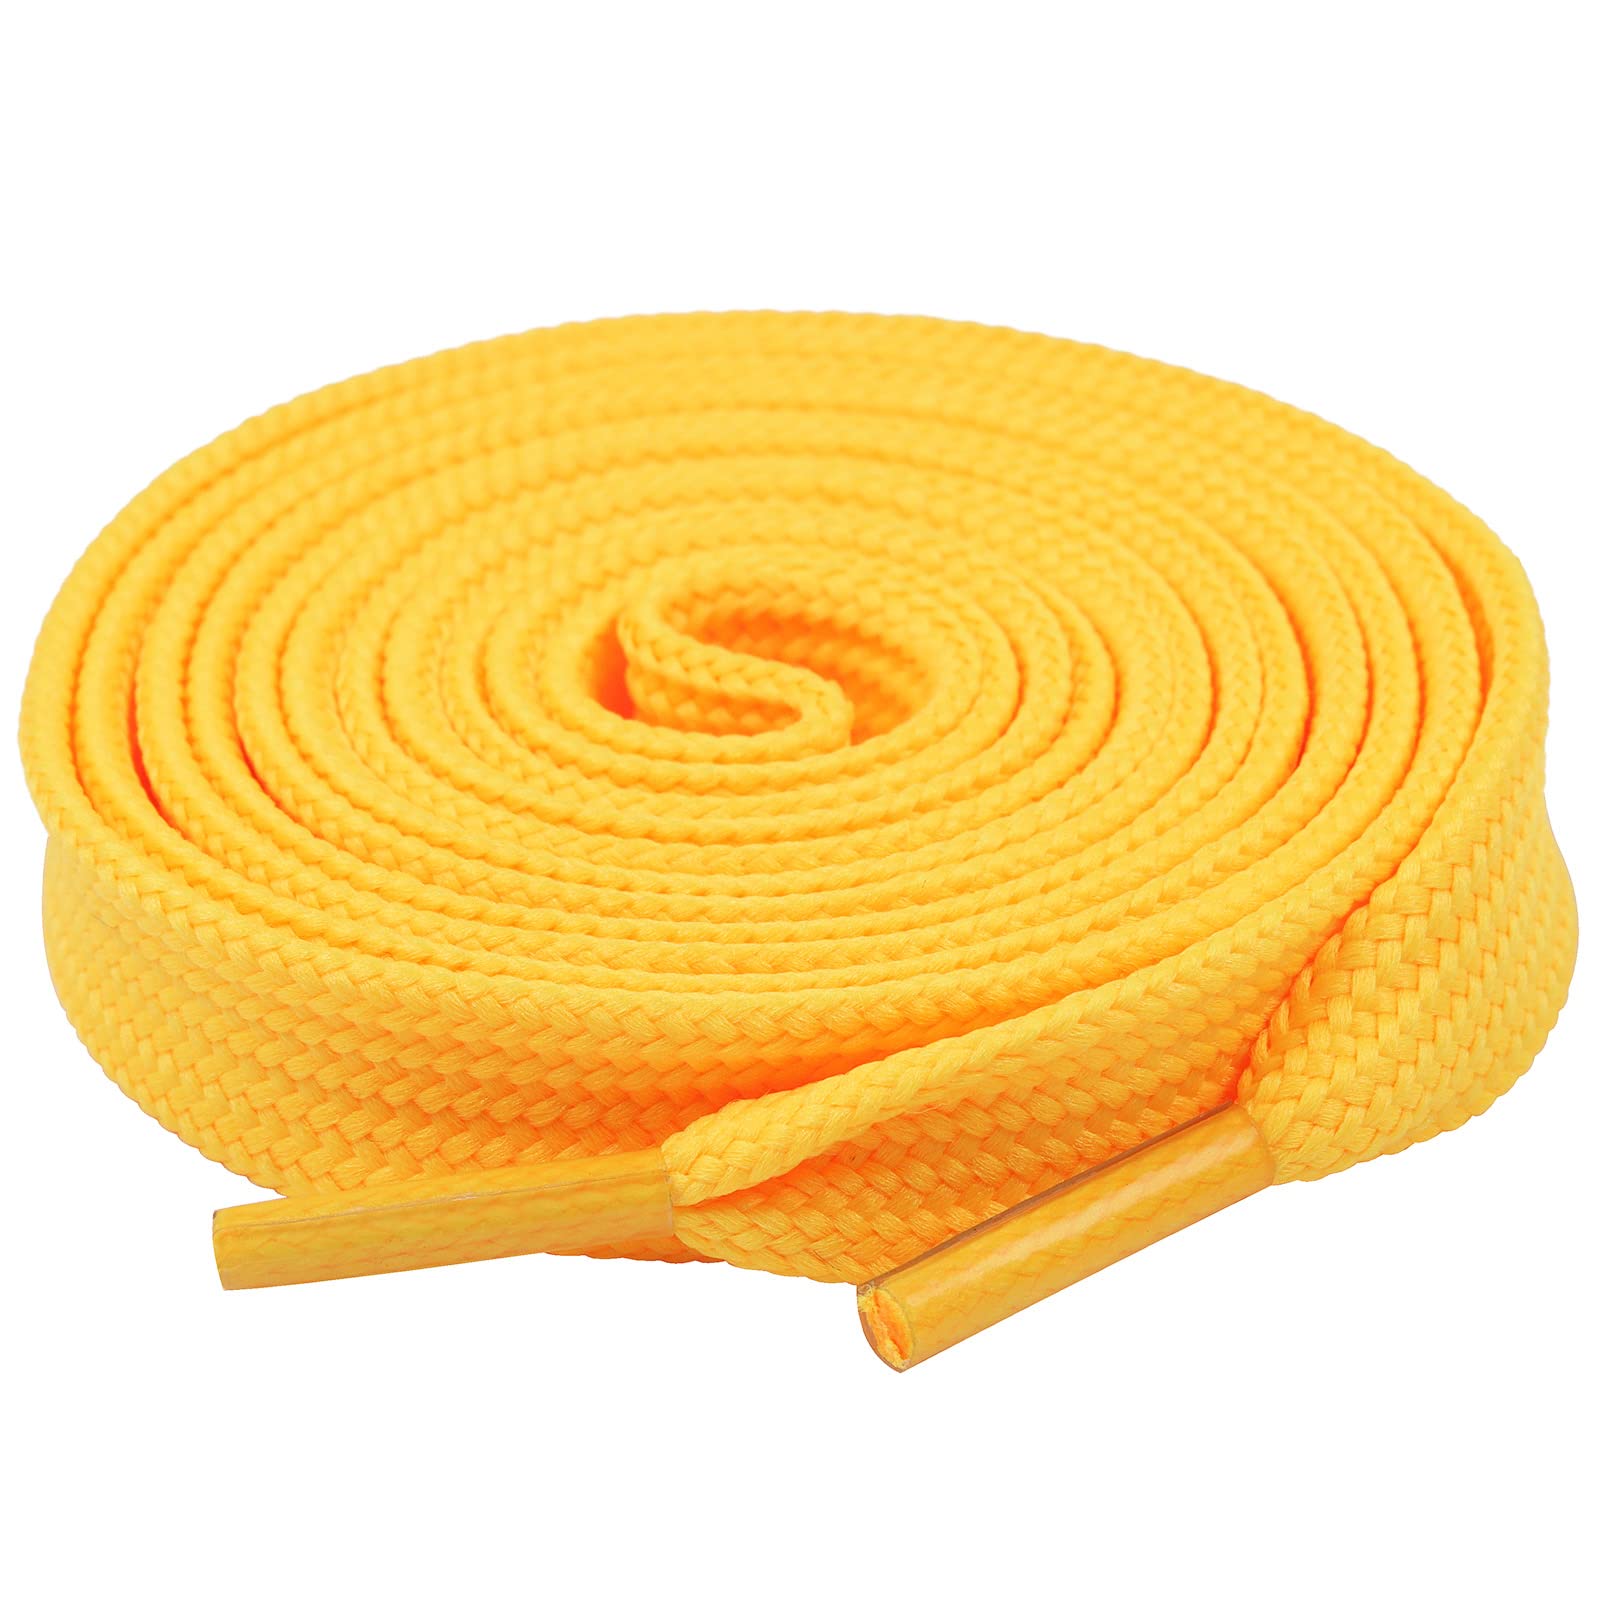 Olukssck 1 Pair Flat Shoe Laces for Sneakers, 25 Wide Athletic Shoelaces Yellow 40 inch(102cm)